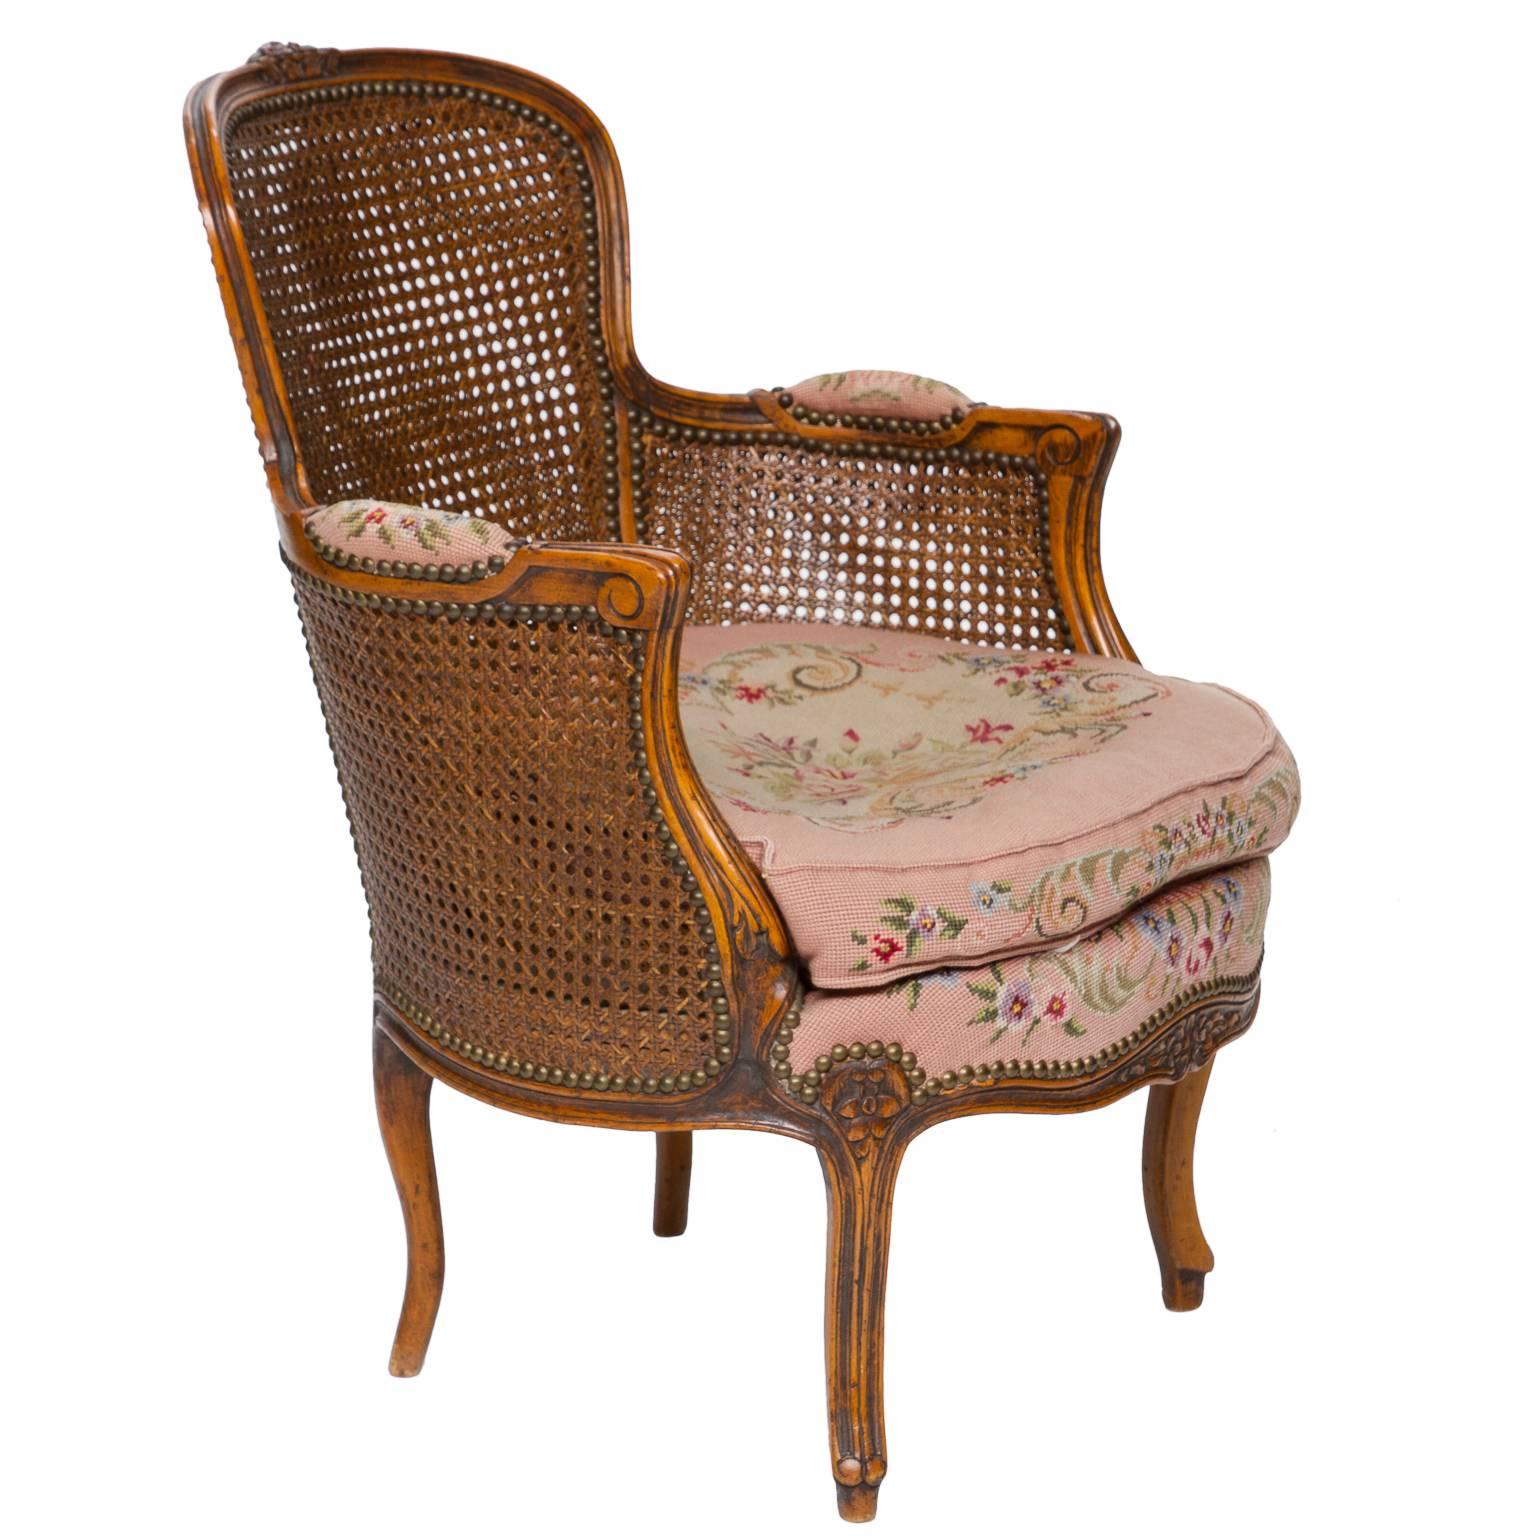 A very nice quality walnut french Louis XV bergere. The back has double cane which even curves under the arm supports. The cane is is very good condition. A nice tapestry covering to the seat and arms pads. Notice the tapestry rolls over the apron